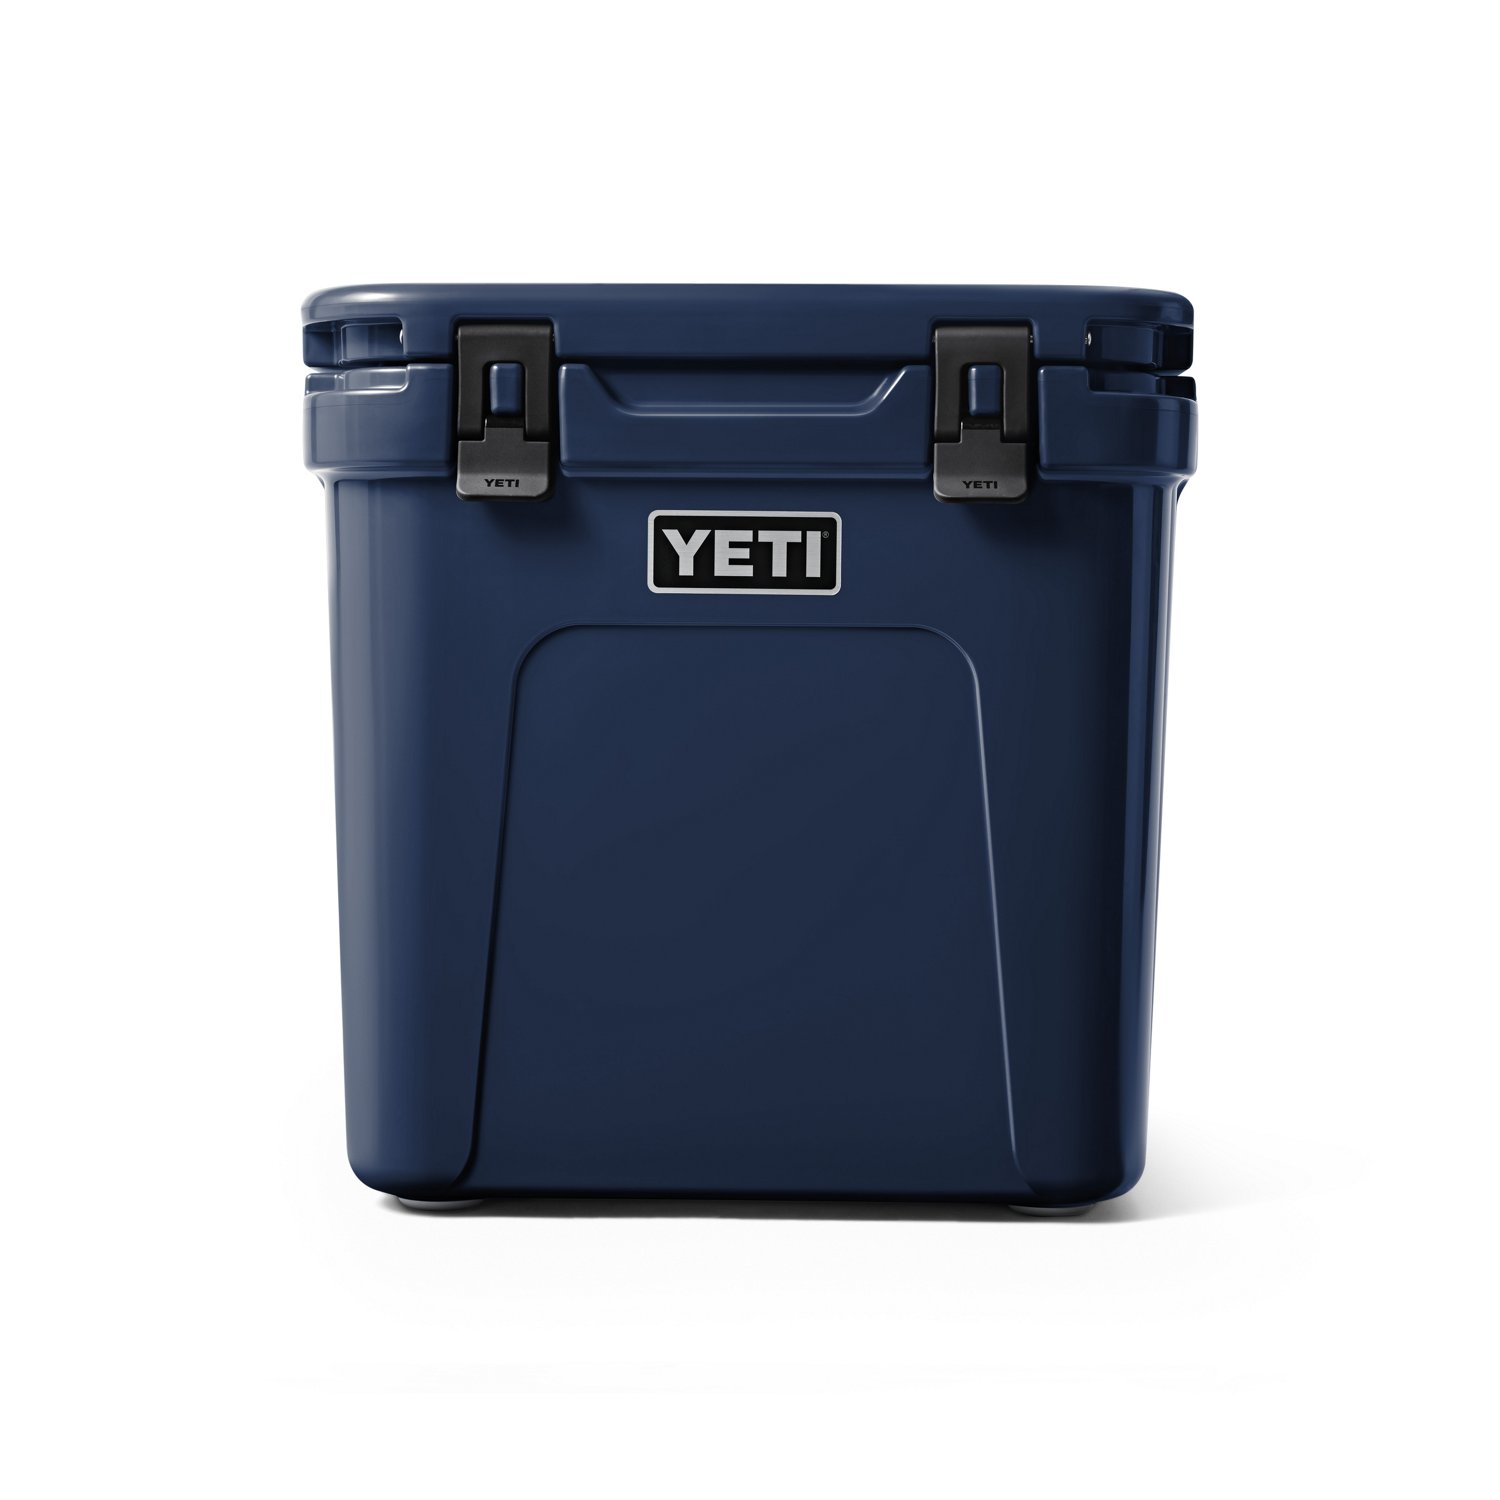 https://academy.scene7.com/is/image/academy///camping/coolers/blue_yeti-roadie-48-wheeled-cooler_10048200000/55b8a3dc9f73463ea85ebeaadfa2c235?$pdp-mobile-gallery-ng$